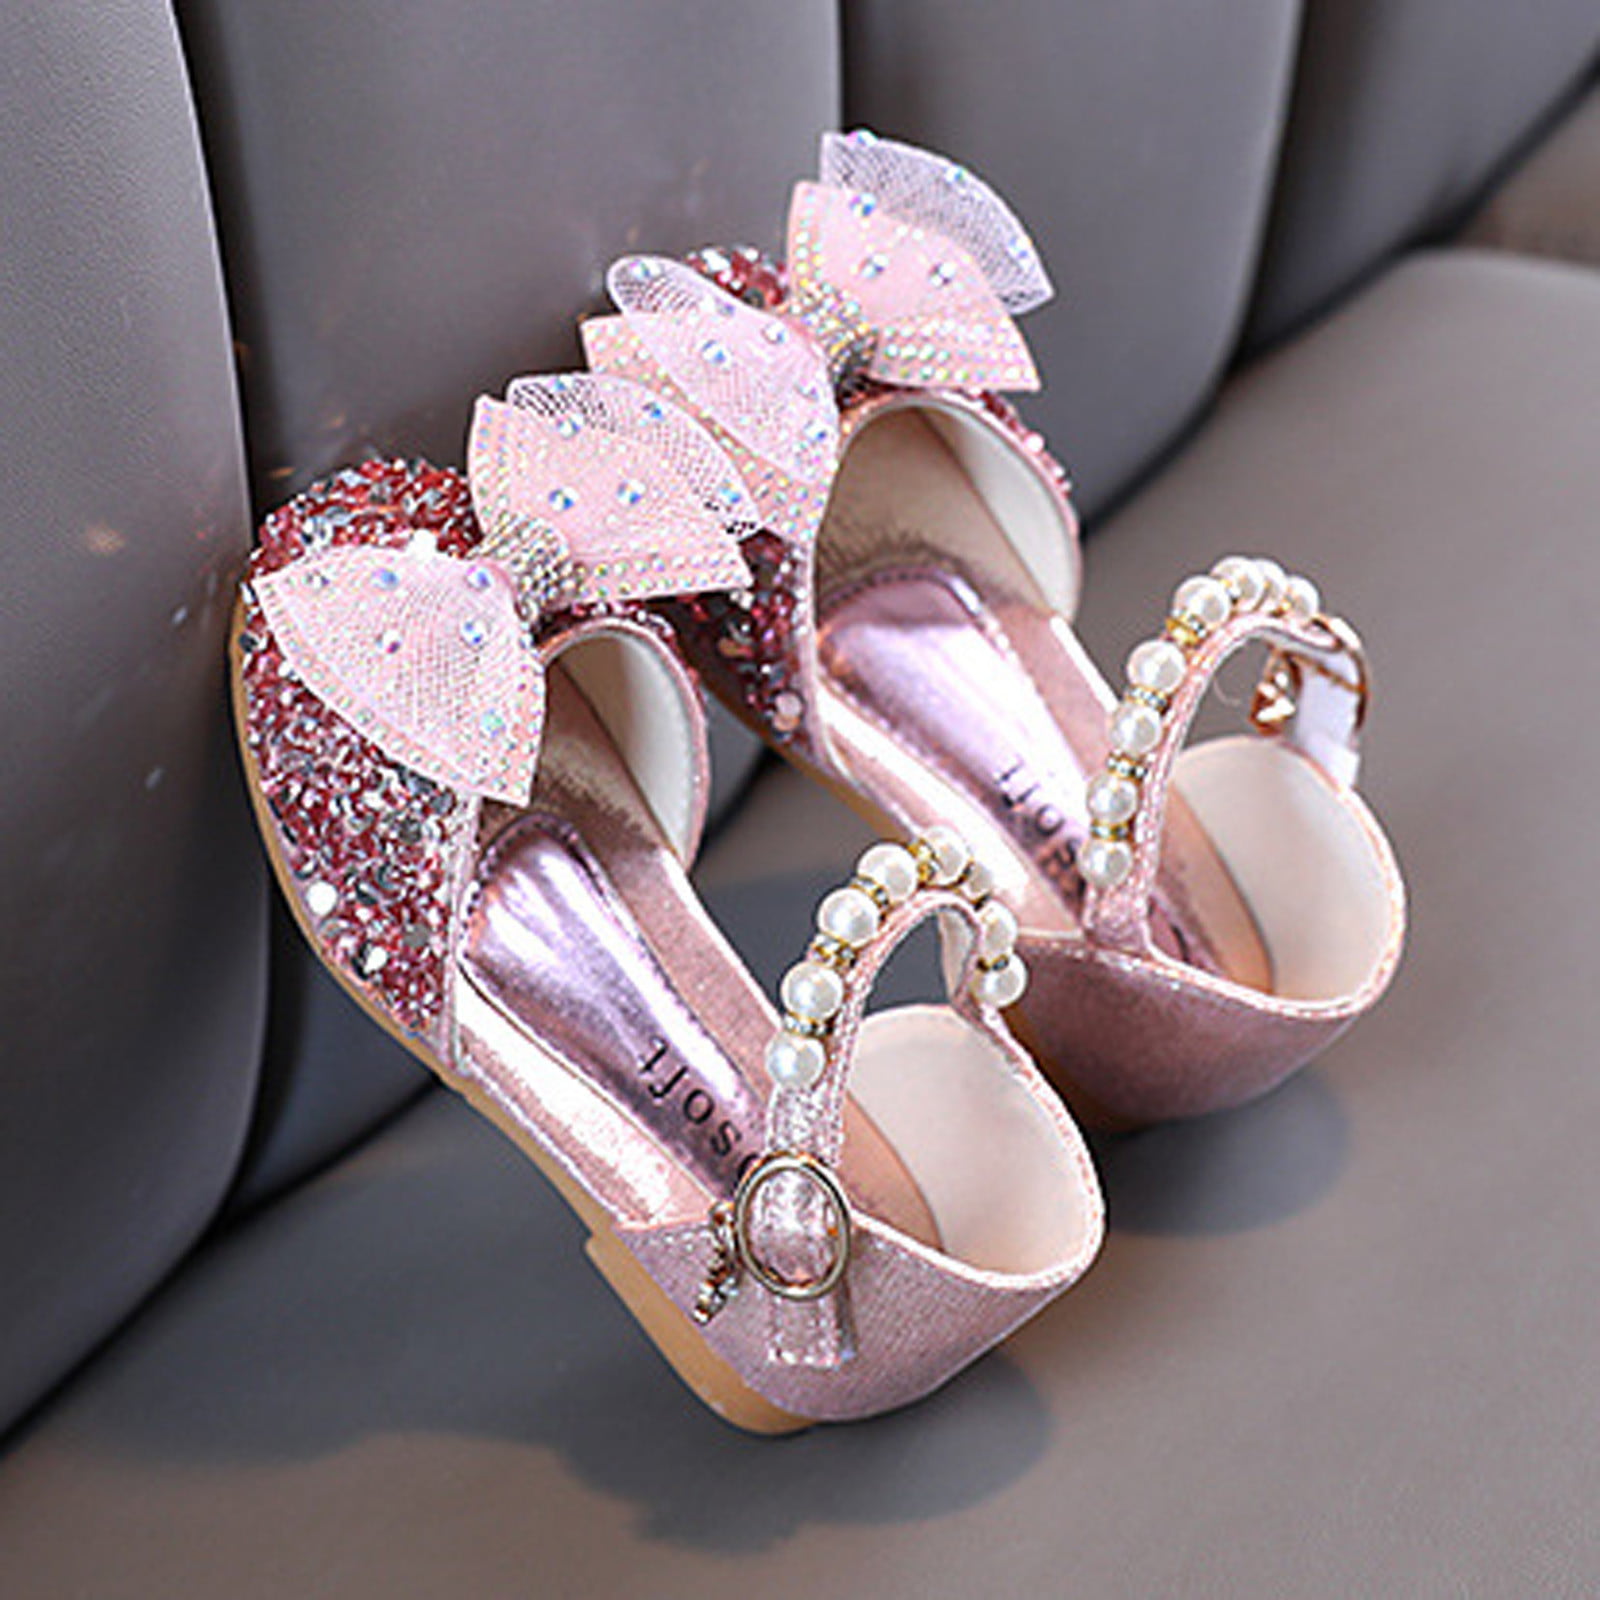 New Girls Kids Childrens Low Heel Party Wedding Mary Jane Sparkly Sandals  Shoes | eBay